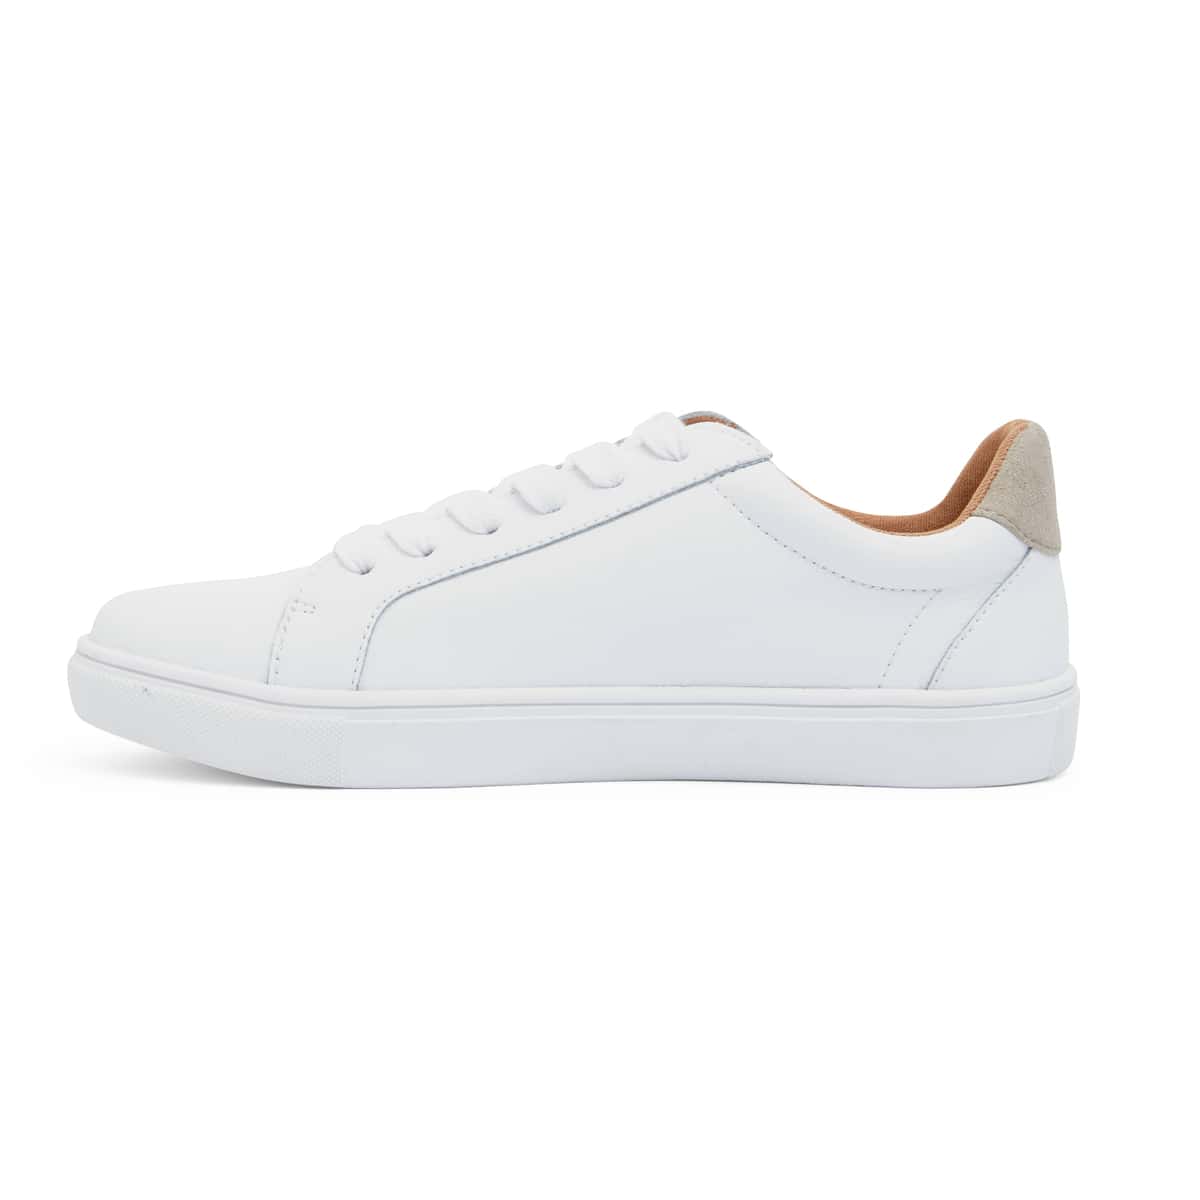 Saxon Sneaker in White And Taupe Leather